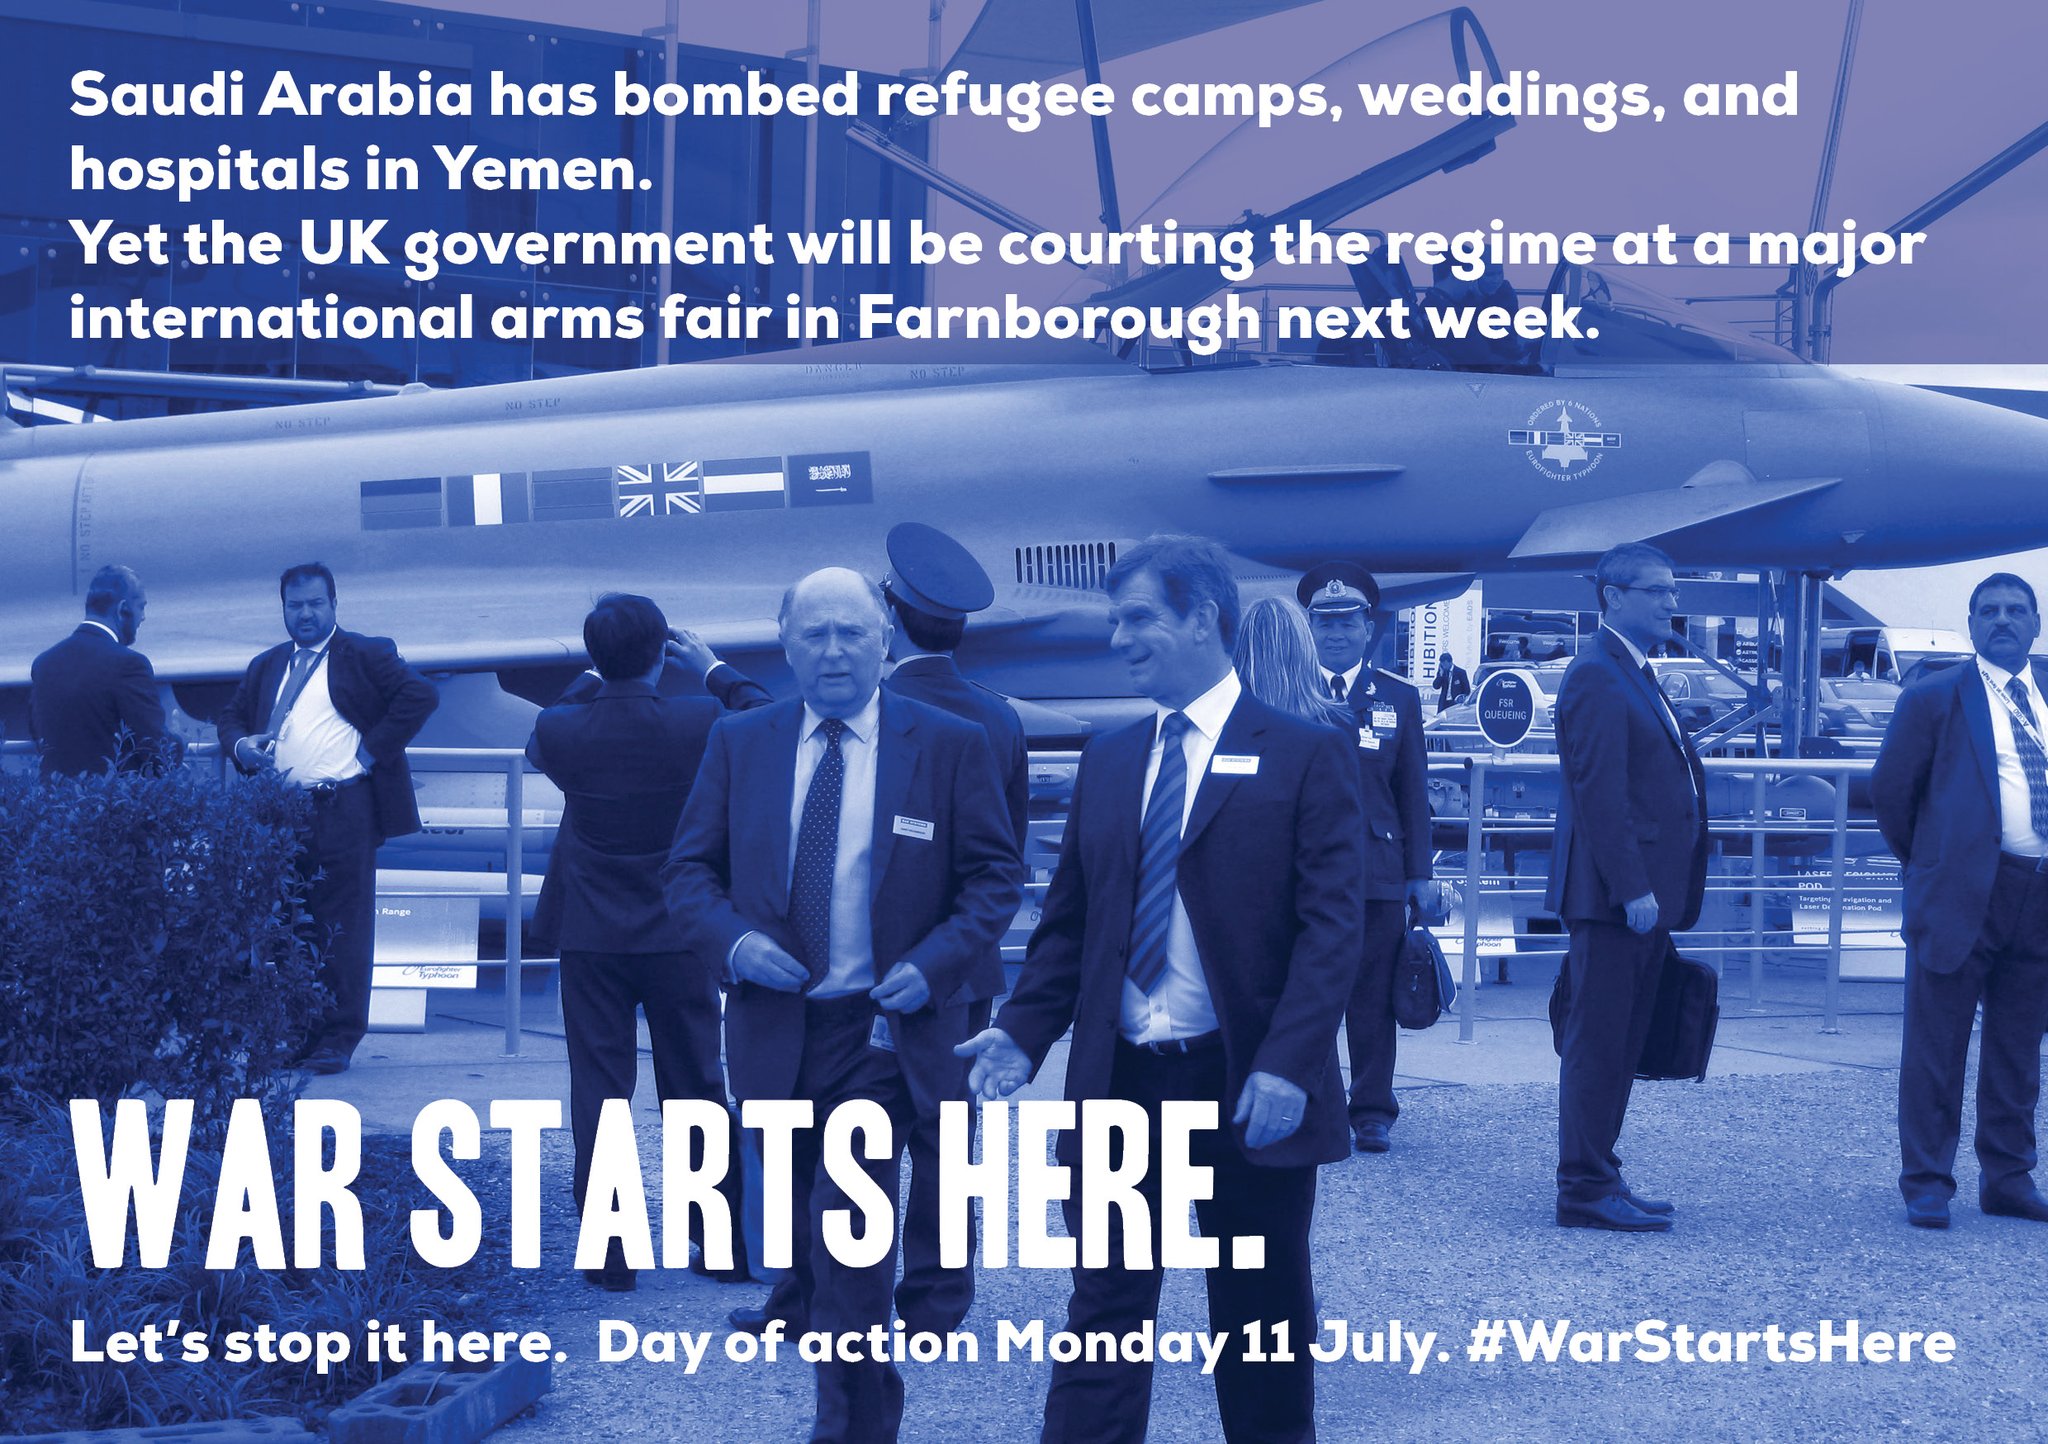 Saudi Arabia has bombed refugee camps, weddings and hospitals in Yemen. Yet the UK government will be courting the regime at a major international arms fair in Farnborough next week. War starts here. Let's stop it here. Day of action Monday 11 July. #WarStartsHere